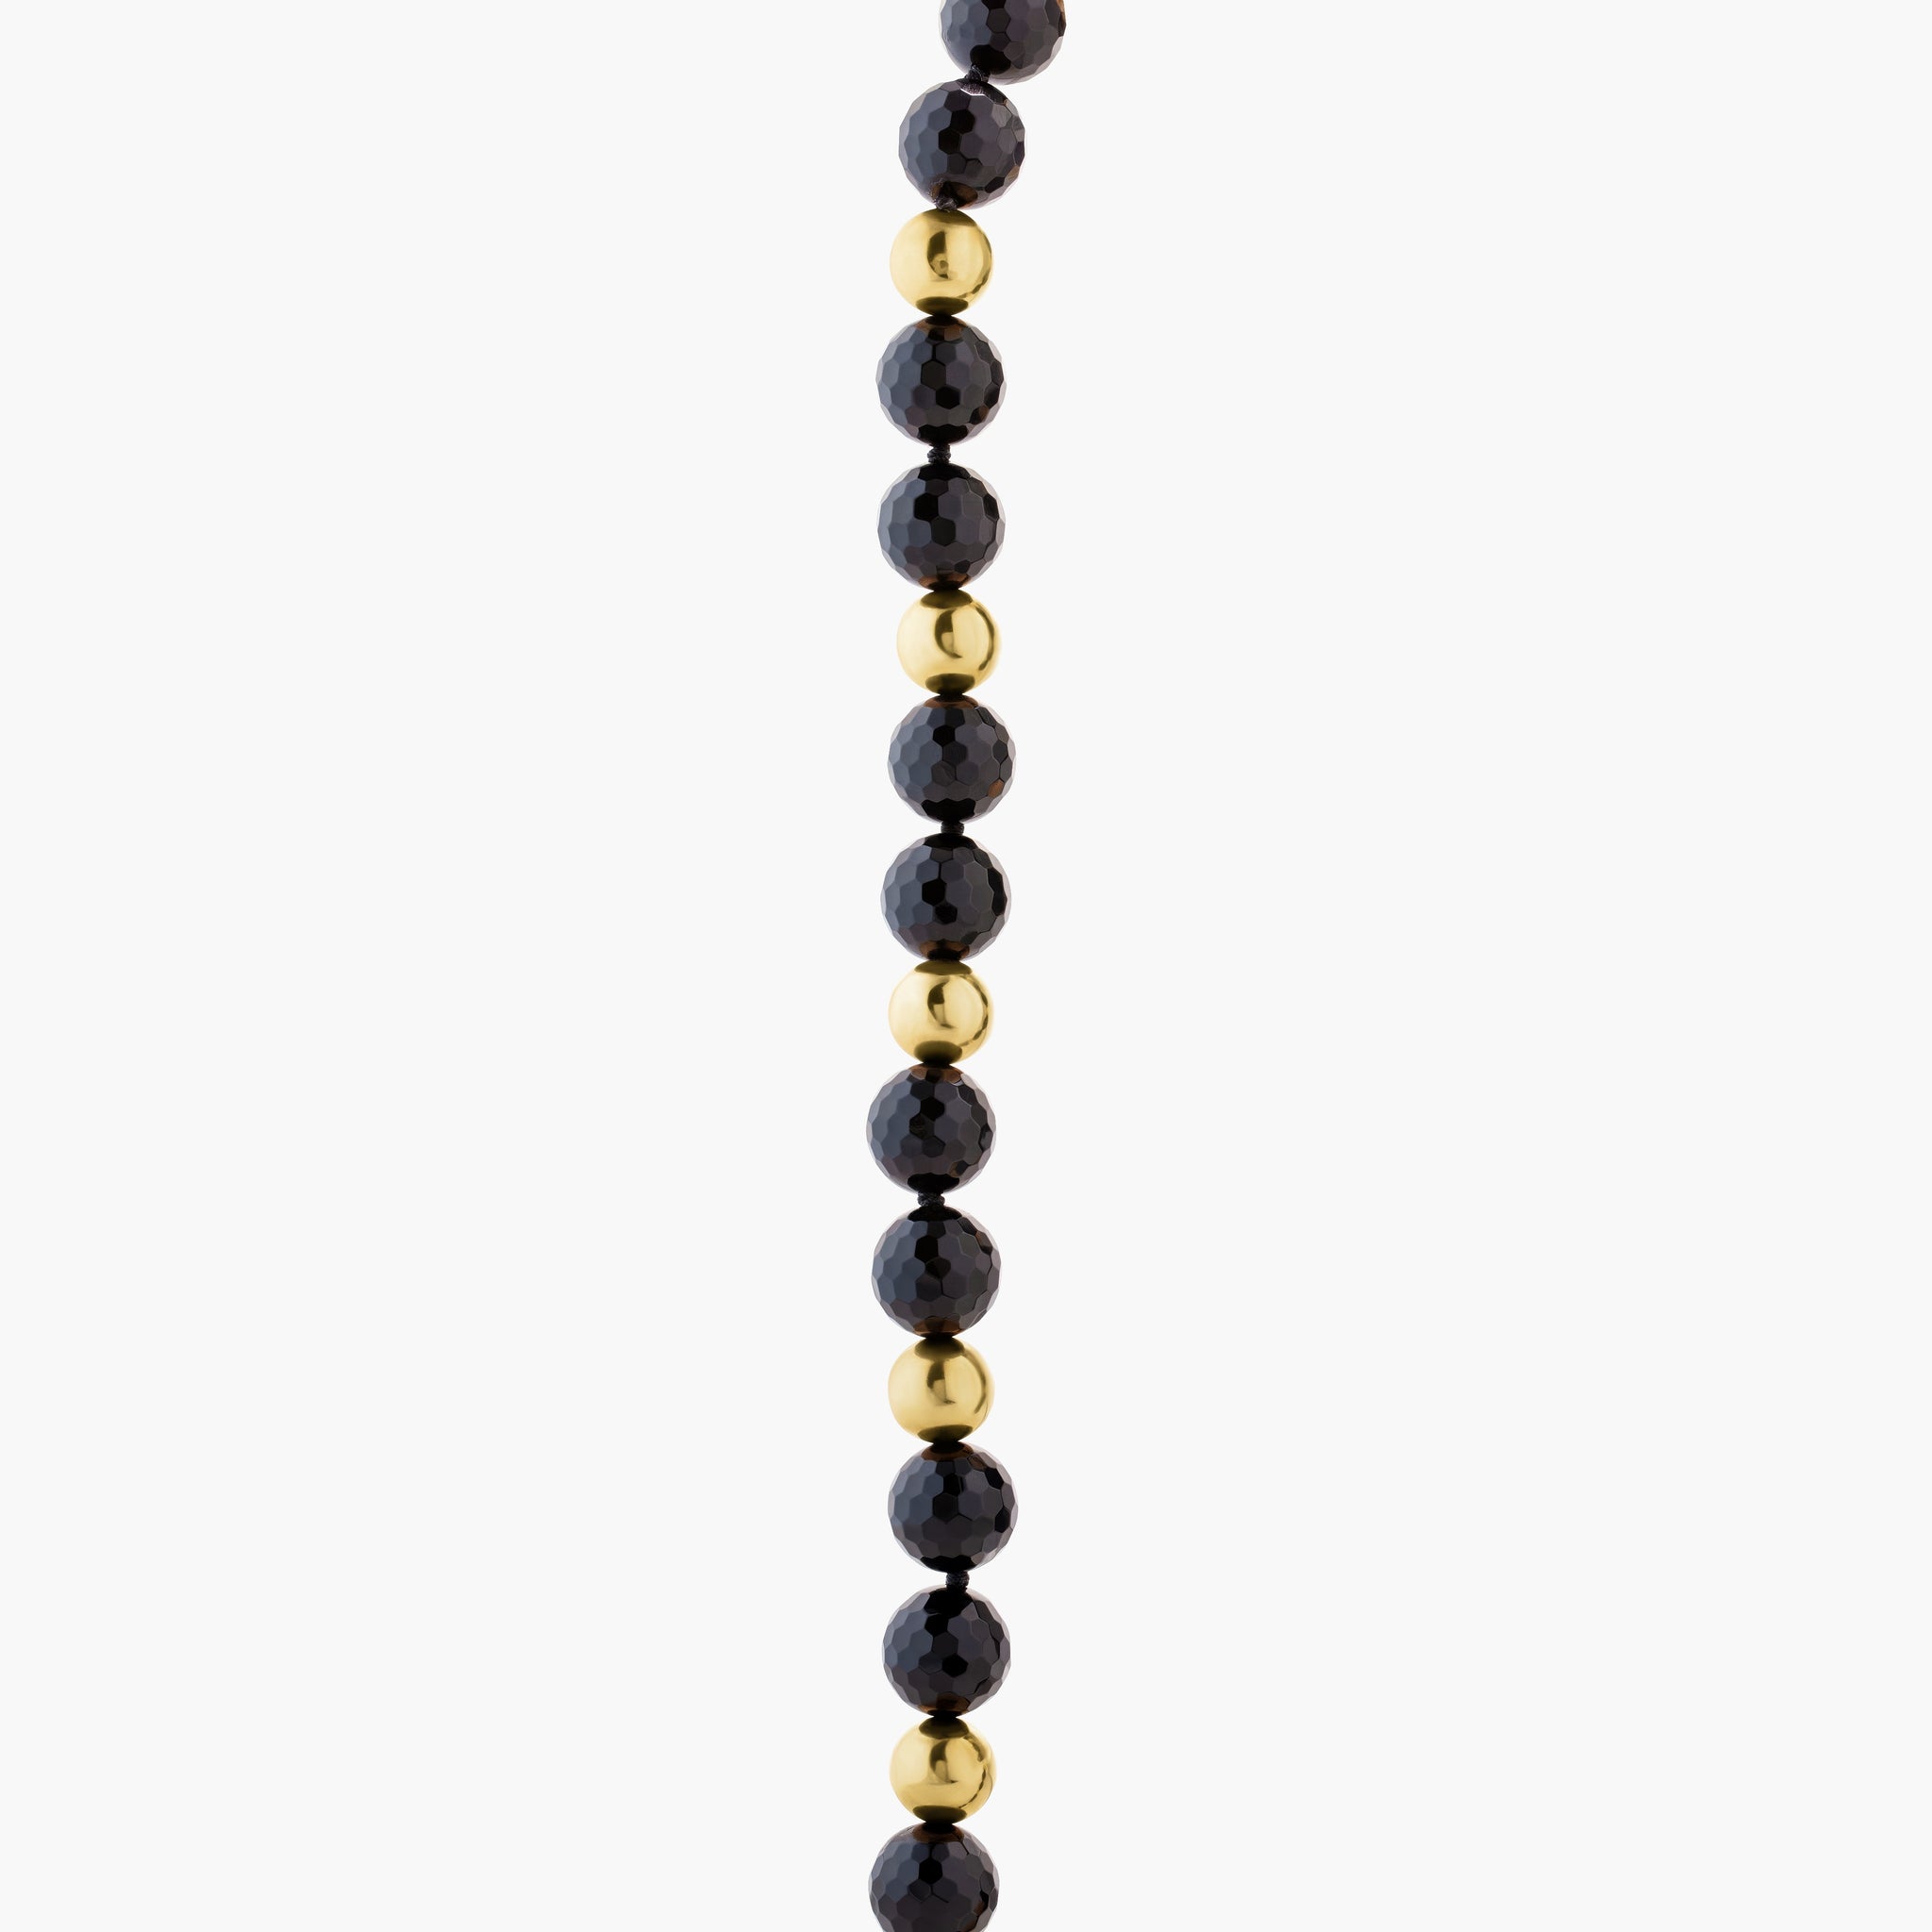 Onyx & gold bead necklace